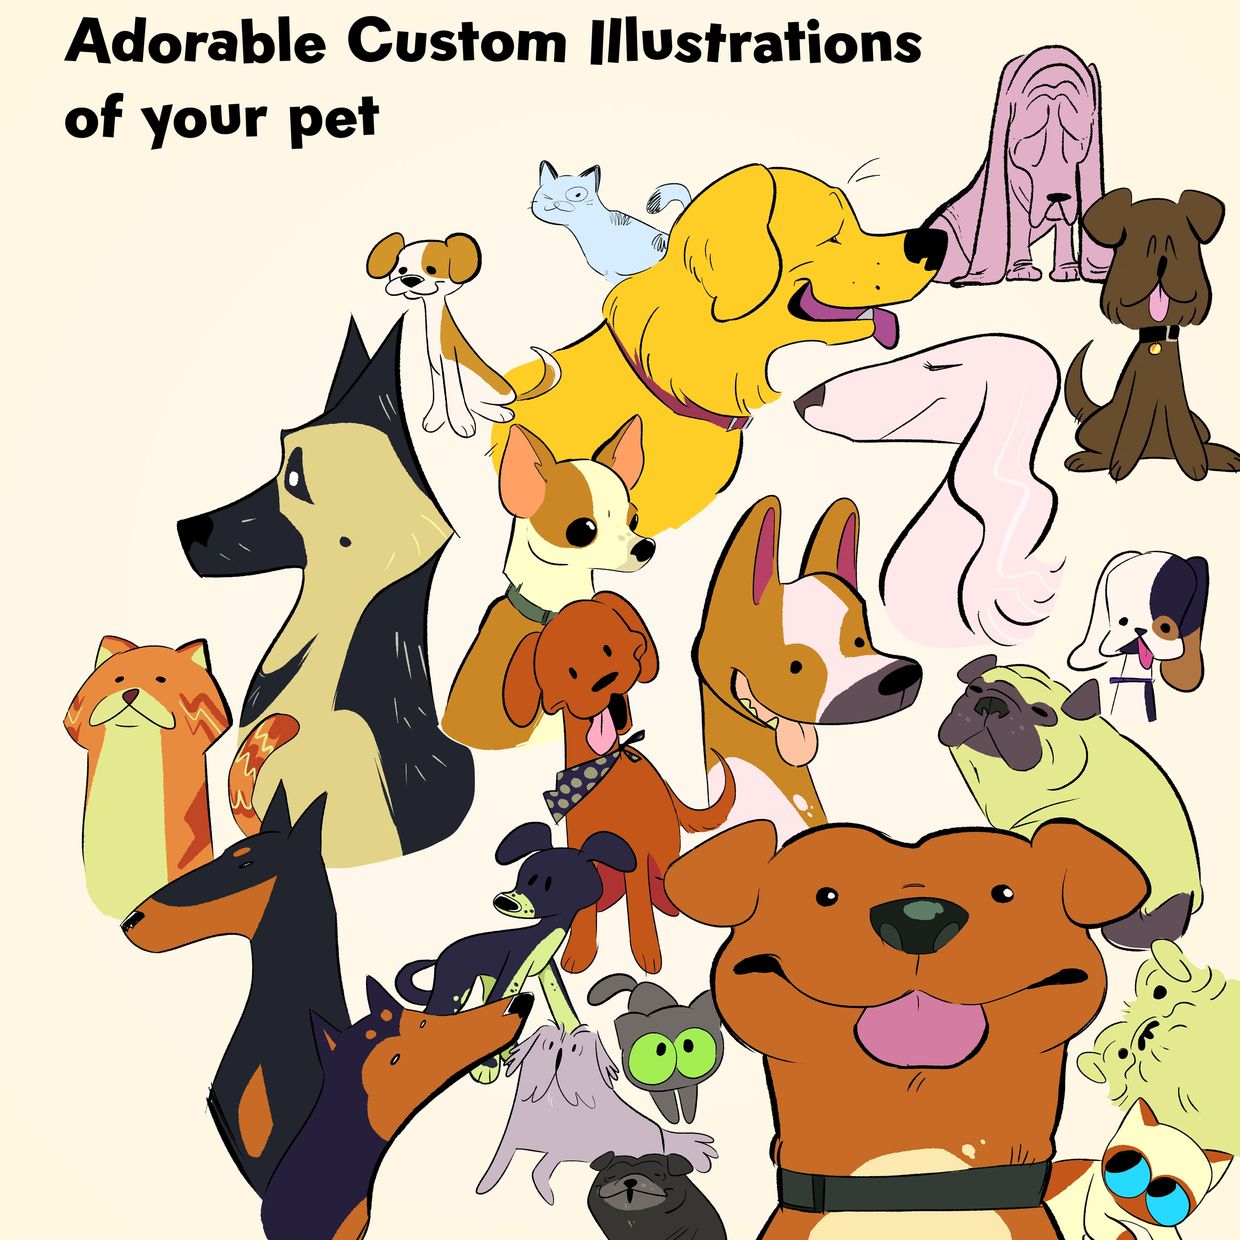 dogs and cats, text in upper right hand corner reads "Adorable Custom Illustrations of your pet"